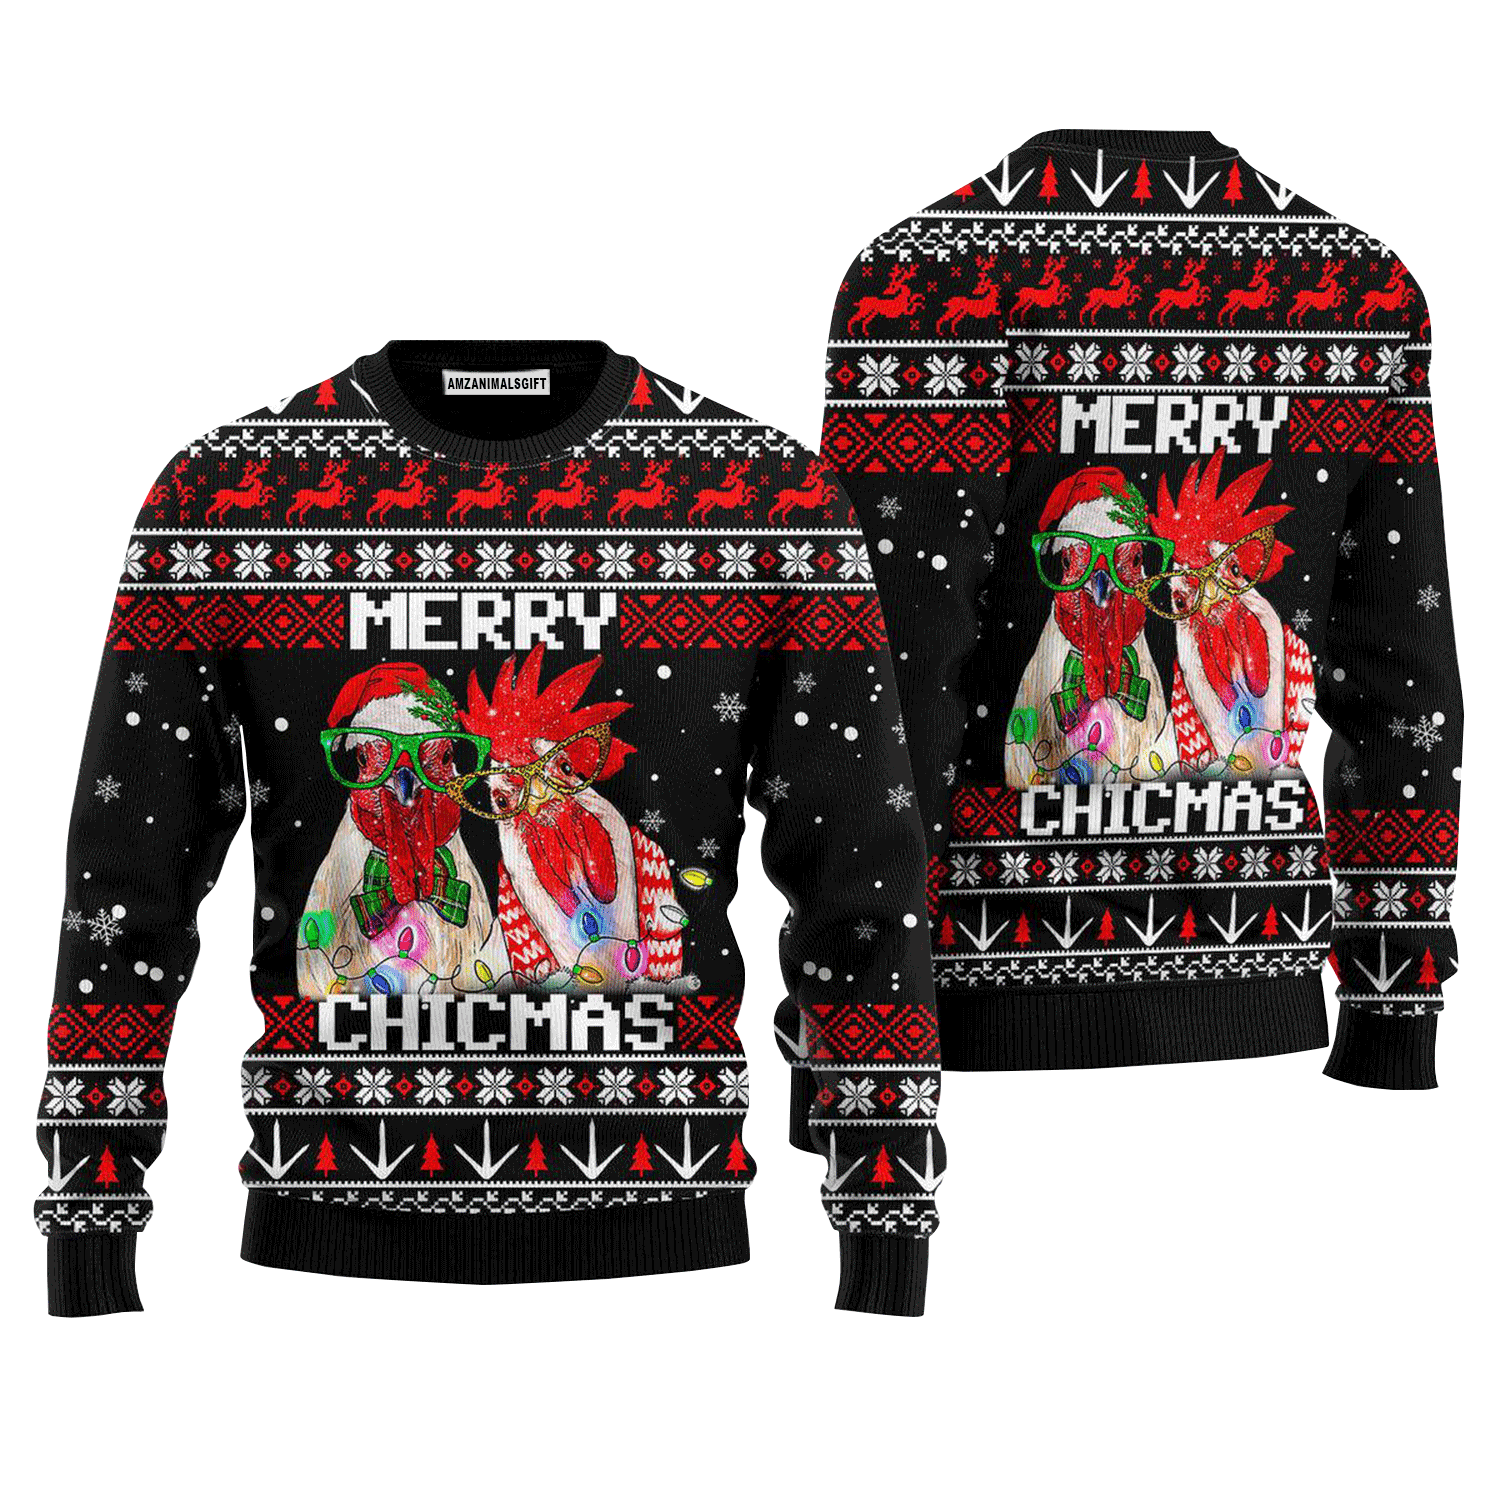 Merry Chickmas Sweater, Ugly Sweater For Men & Women, Perfect Outfit For Christmas New Year Autumn Winter